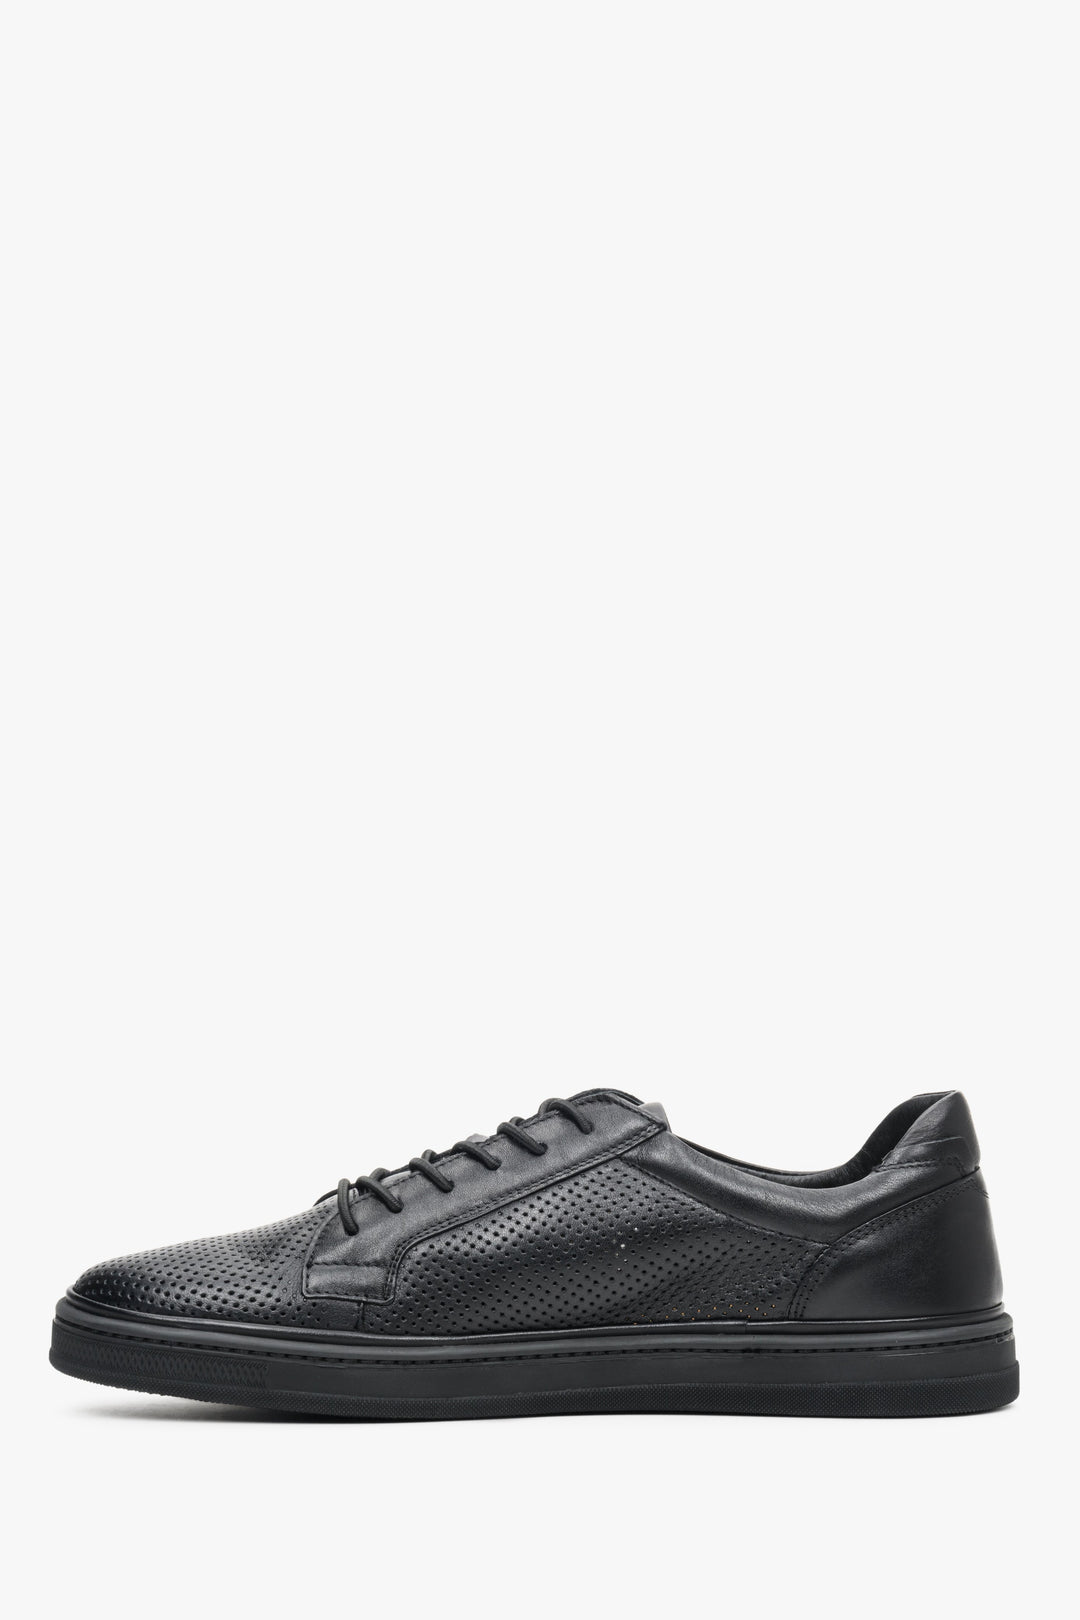 Men's black sneakers with perforations and lacing - Estro model for the summer.